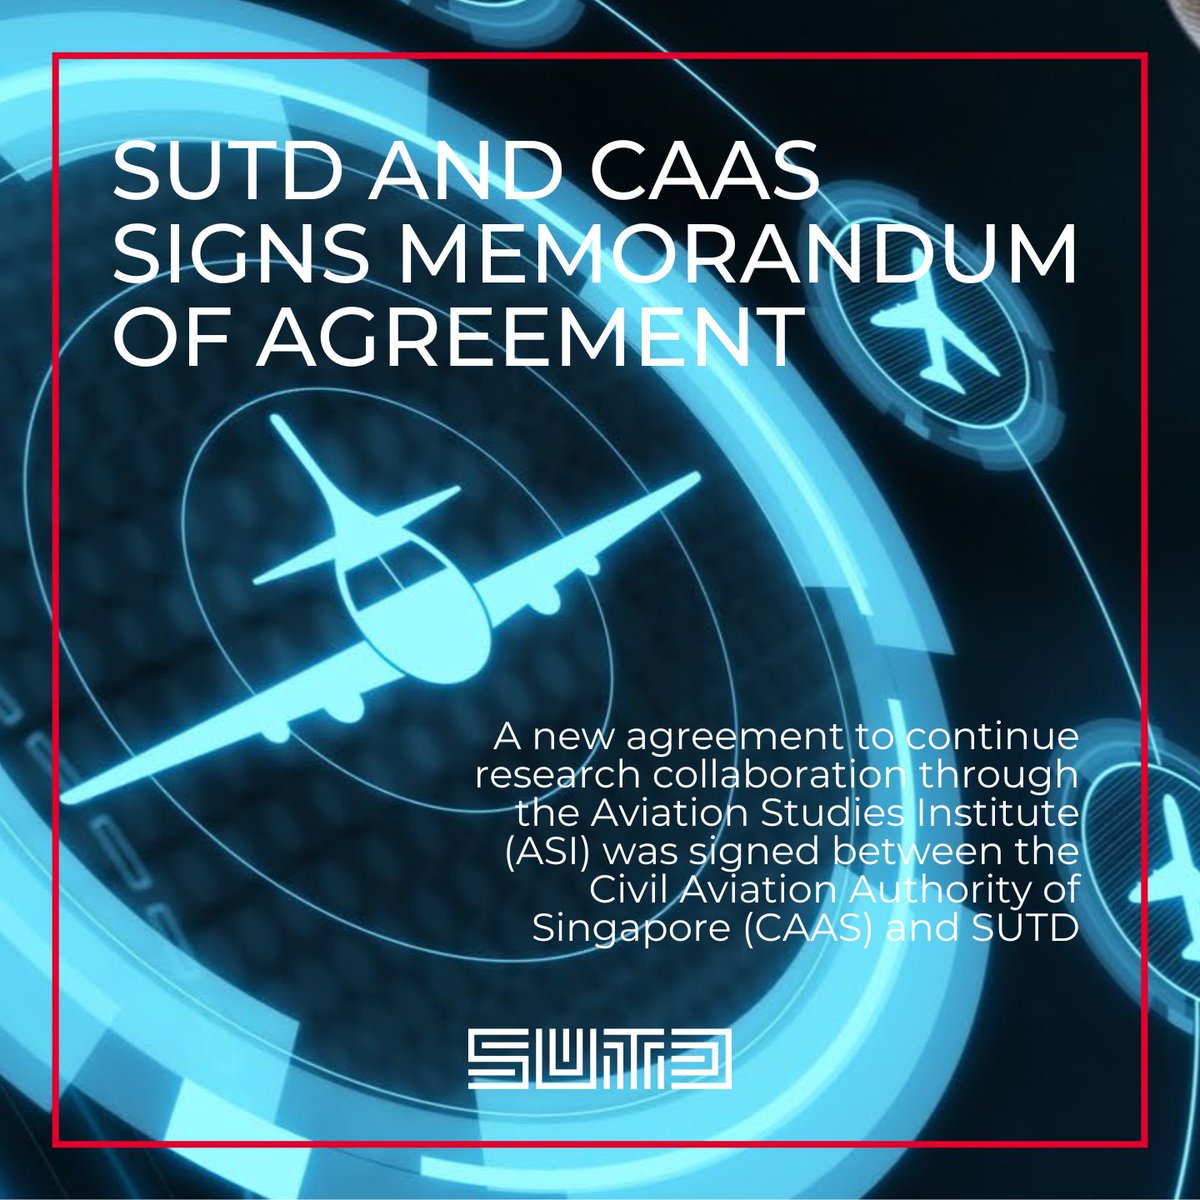 CAAS and SUTD's Aviation Studies Institute (ASI) are continuing their research collaboration to drive innovation in aviation. Stay tuned for updates on operational, safety, and policy research in the industry! @SingaporeCAAS #SUTD #aviation